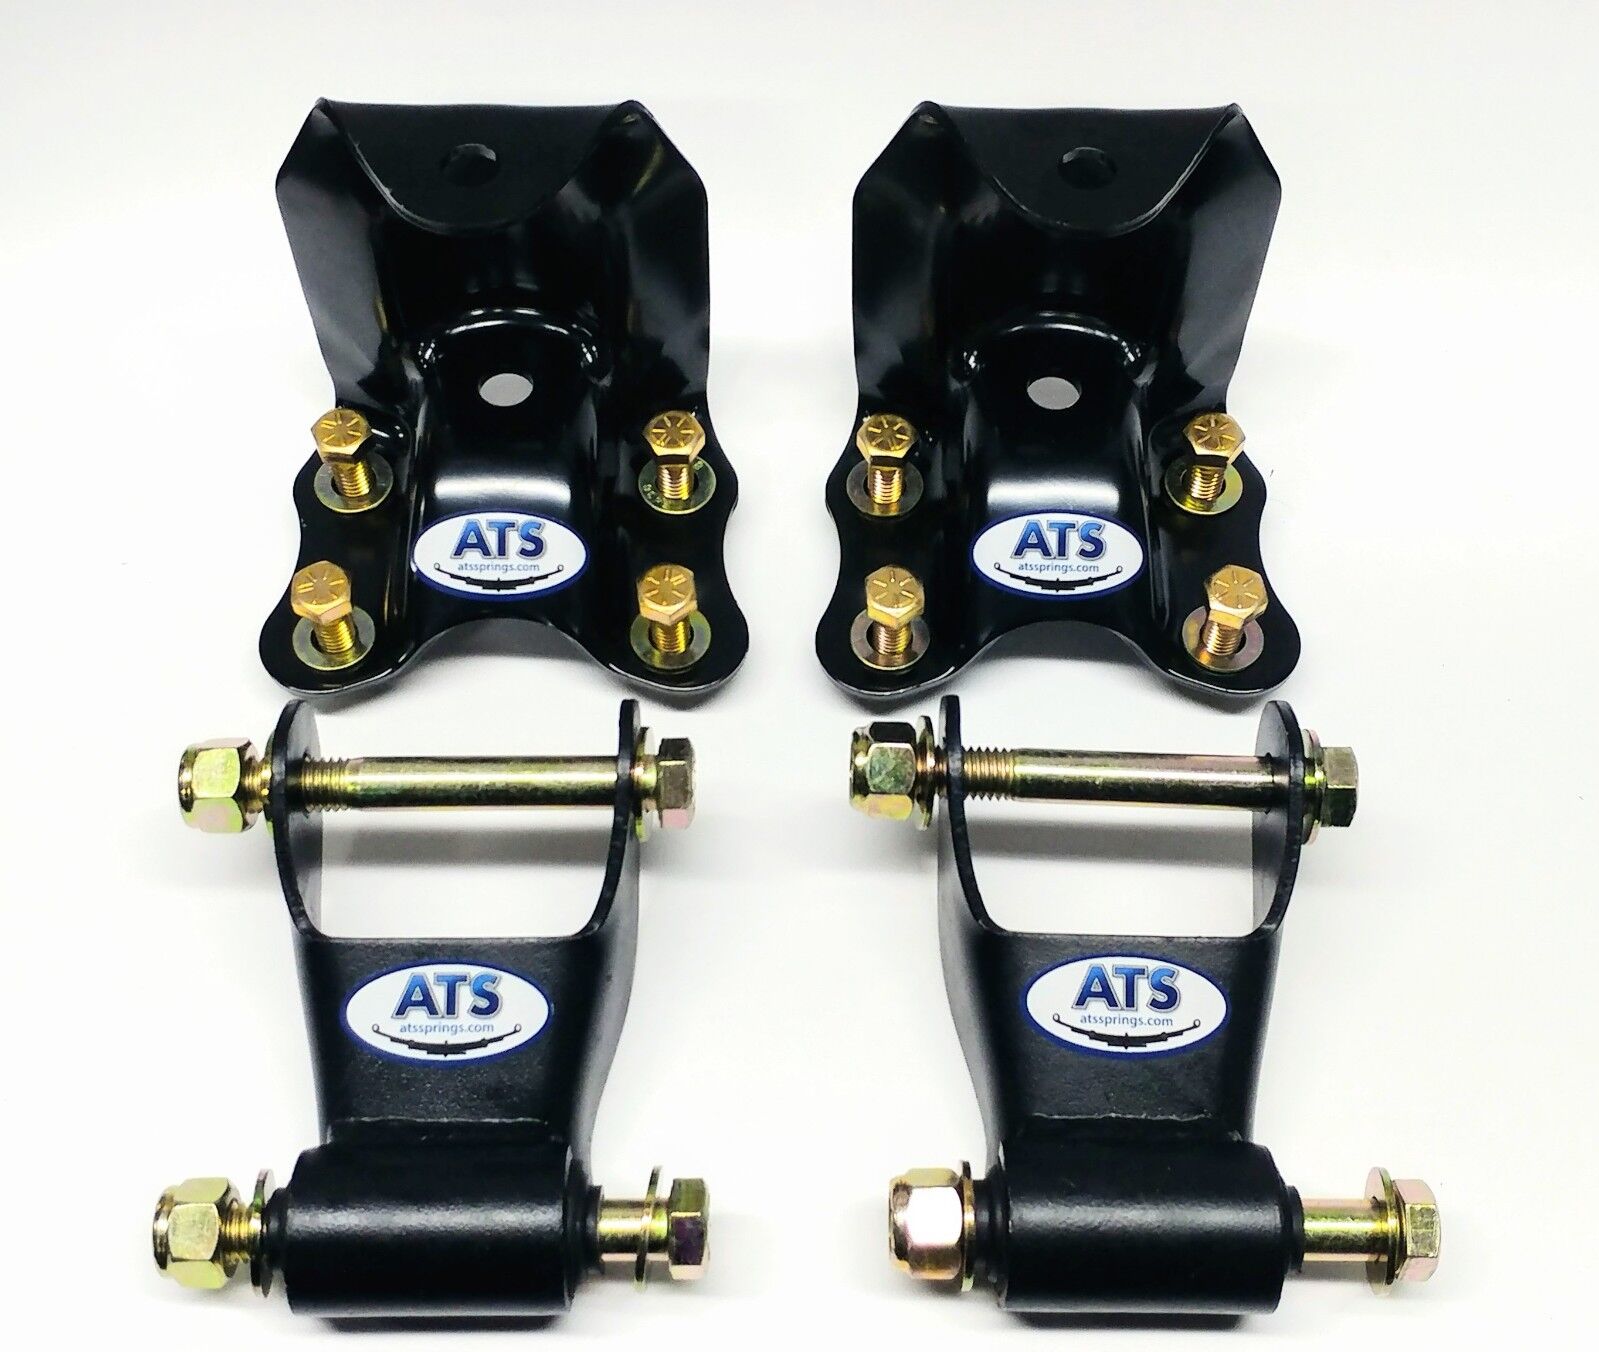 ATS Springs Ford Ranger Rear Hanger and Shackle Kit (Replaces 722-001, 722-010)